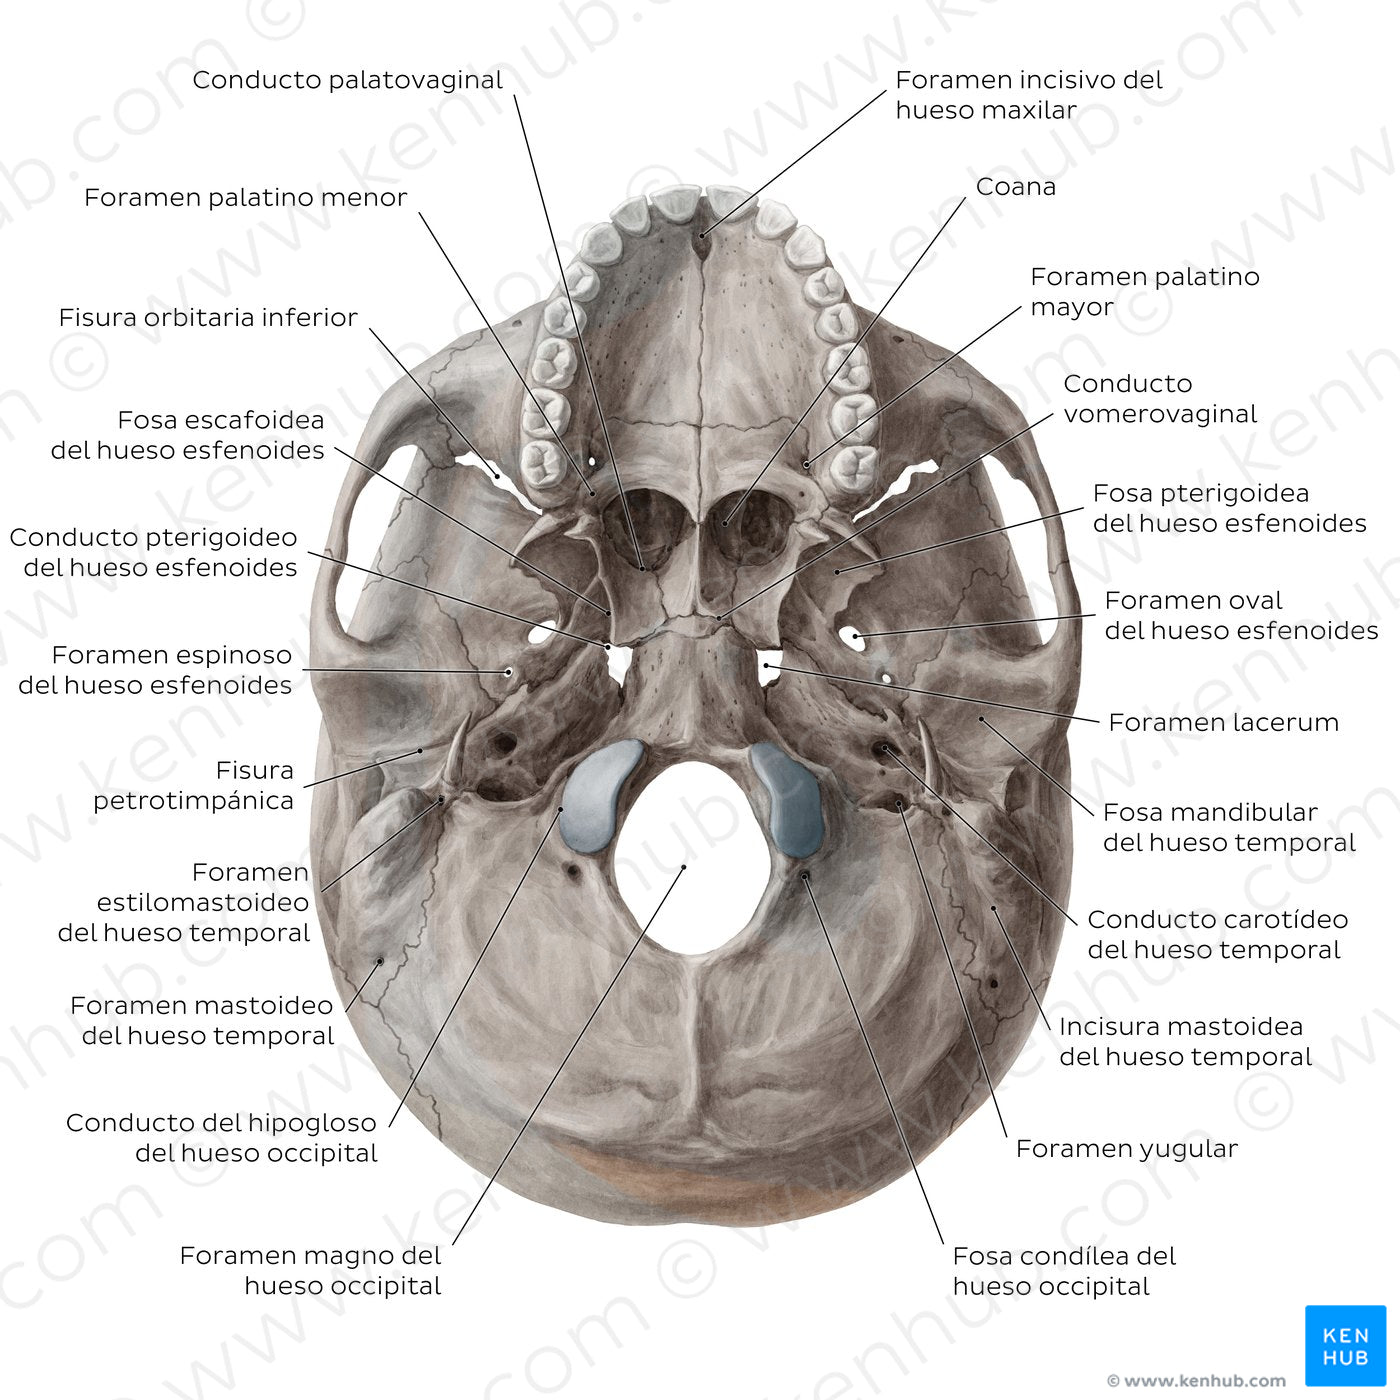 Inferior base of the skull - Foramina, fissures, and canals (Spanish)